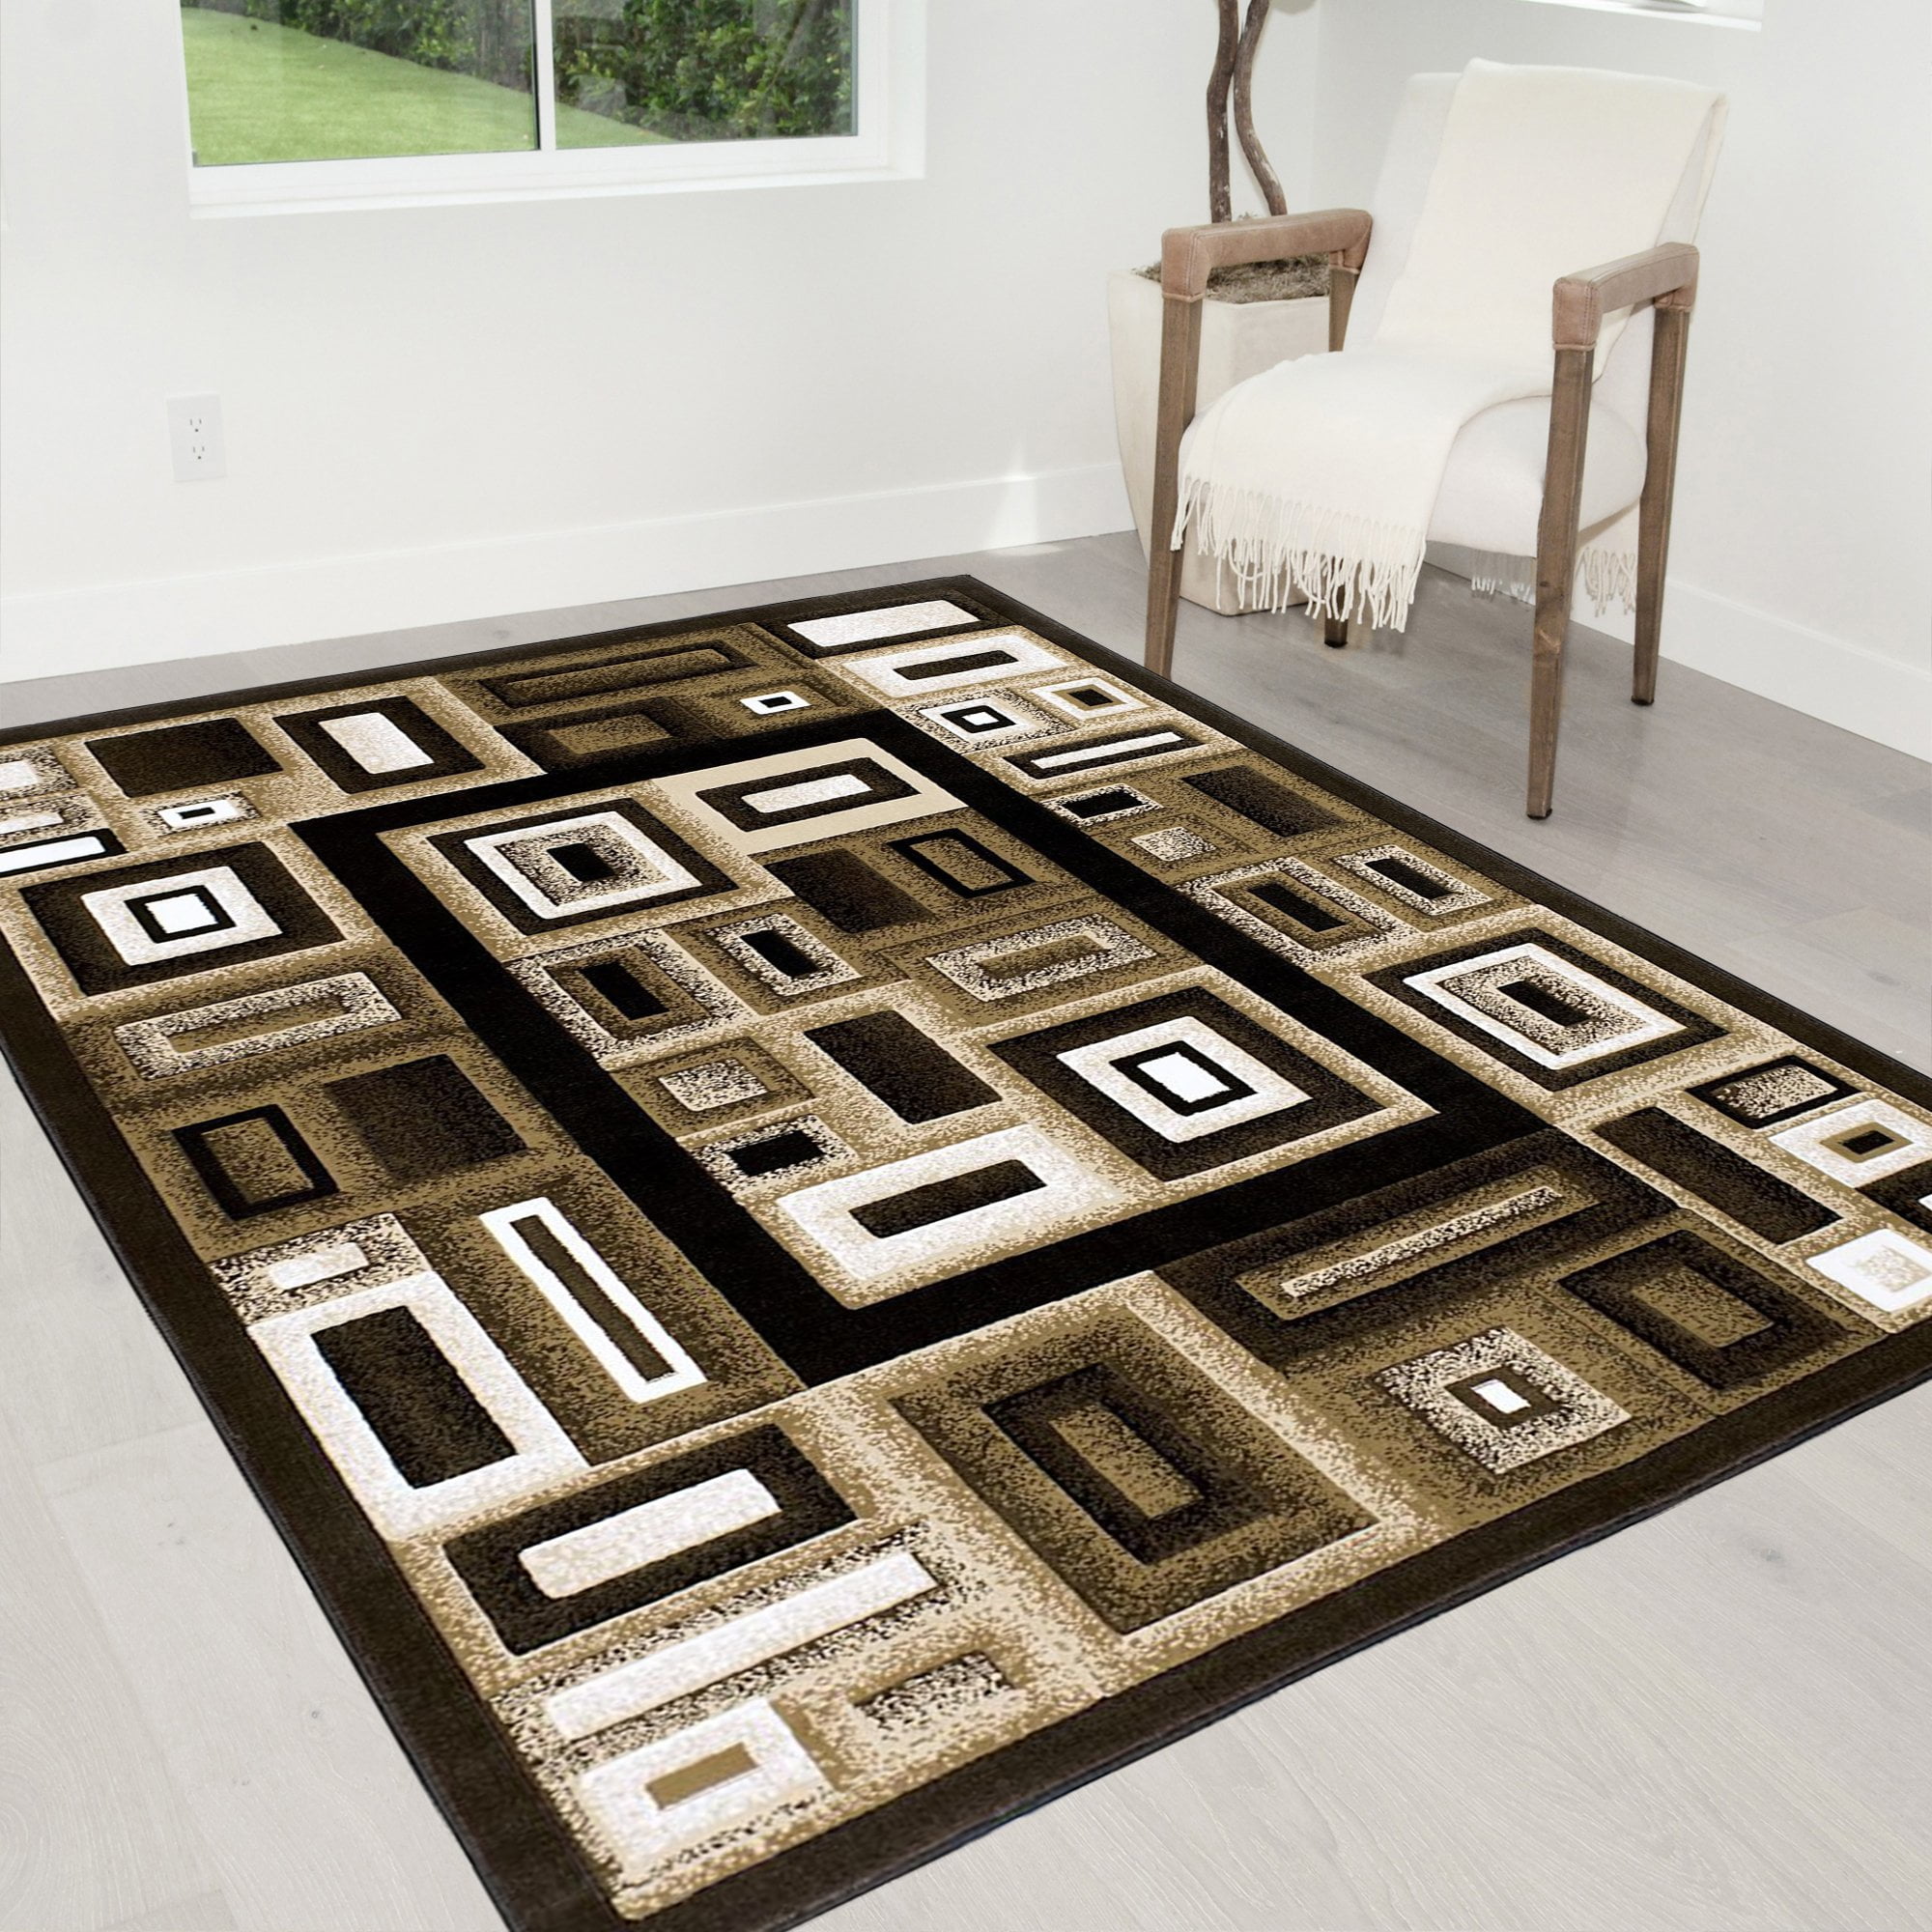 A New Entry Rug